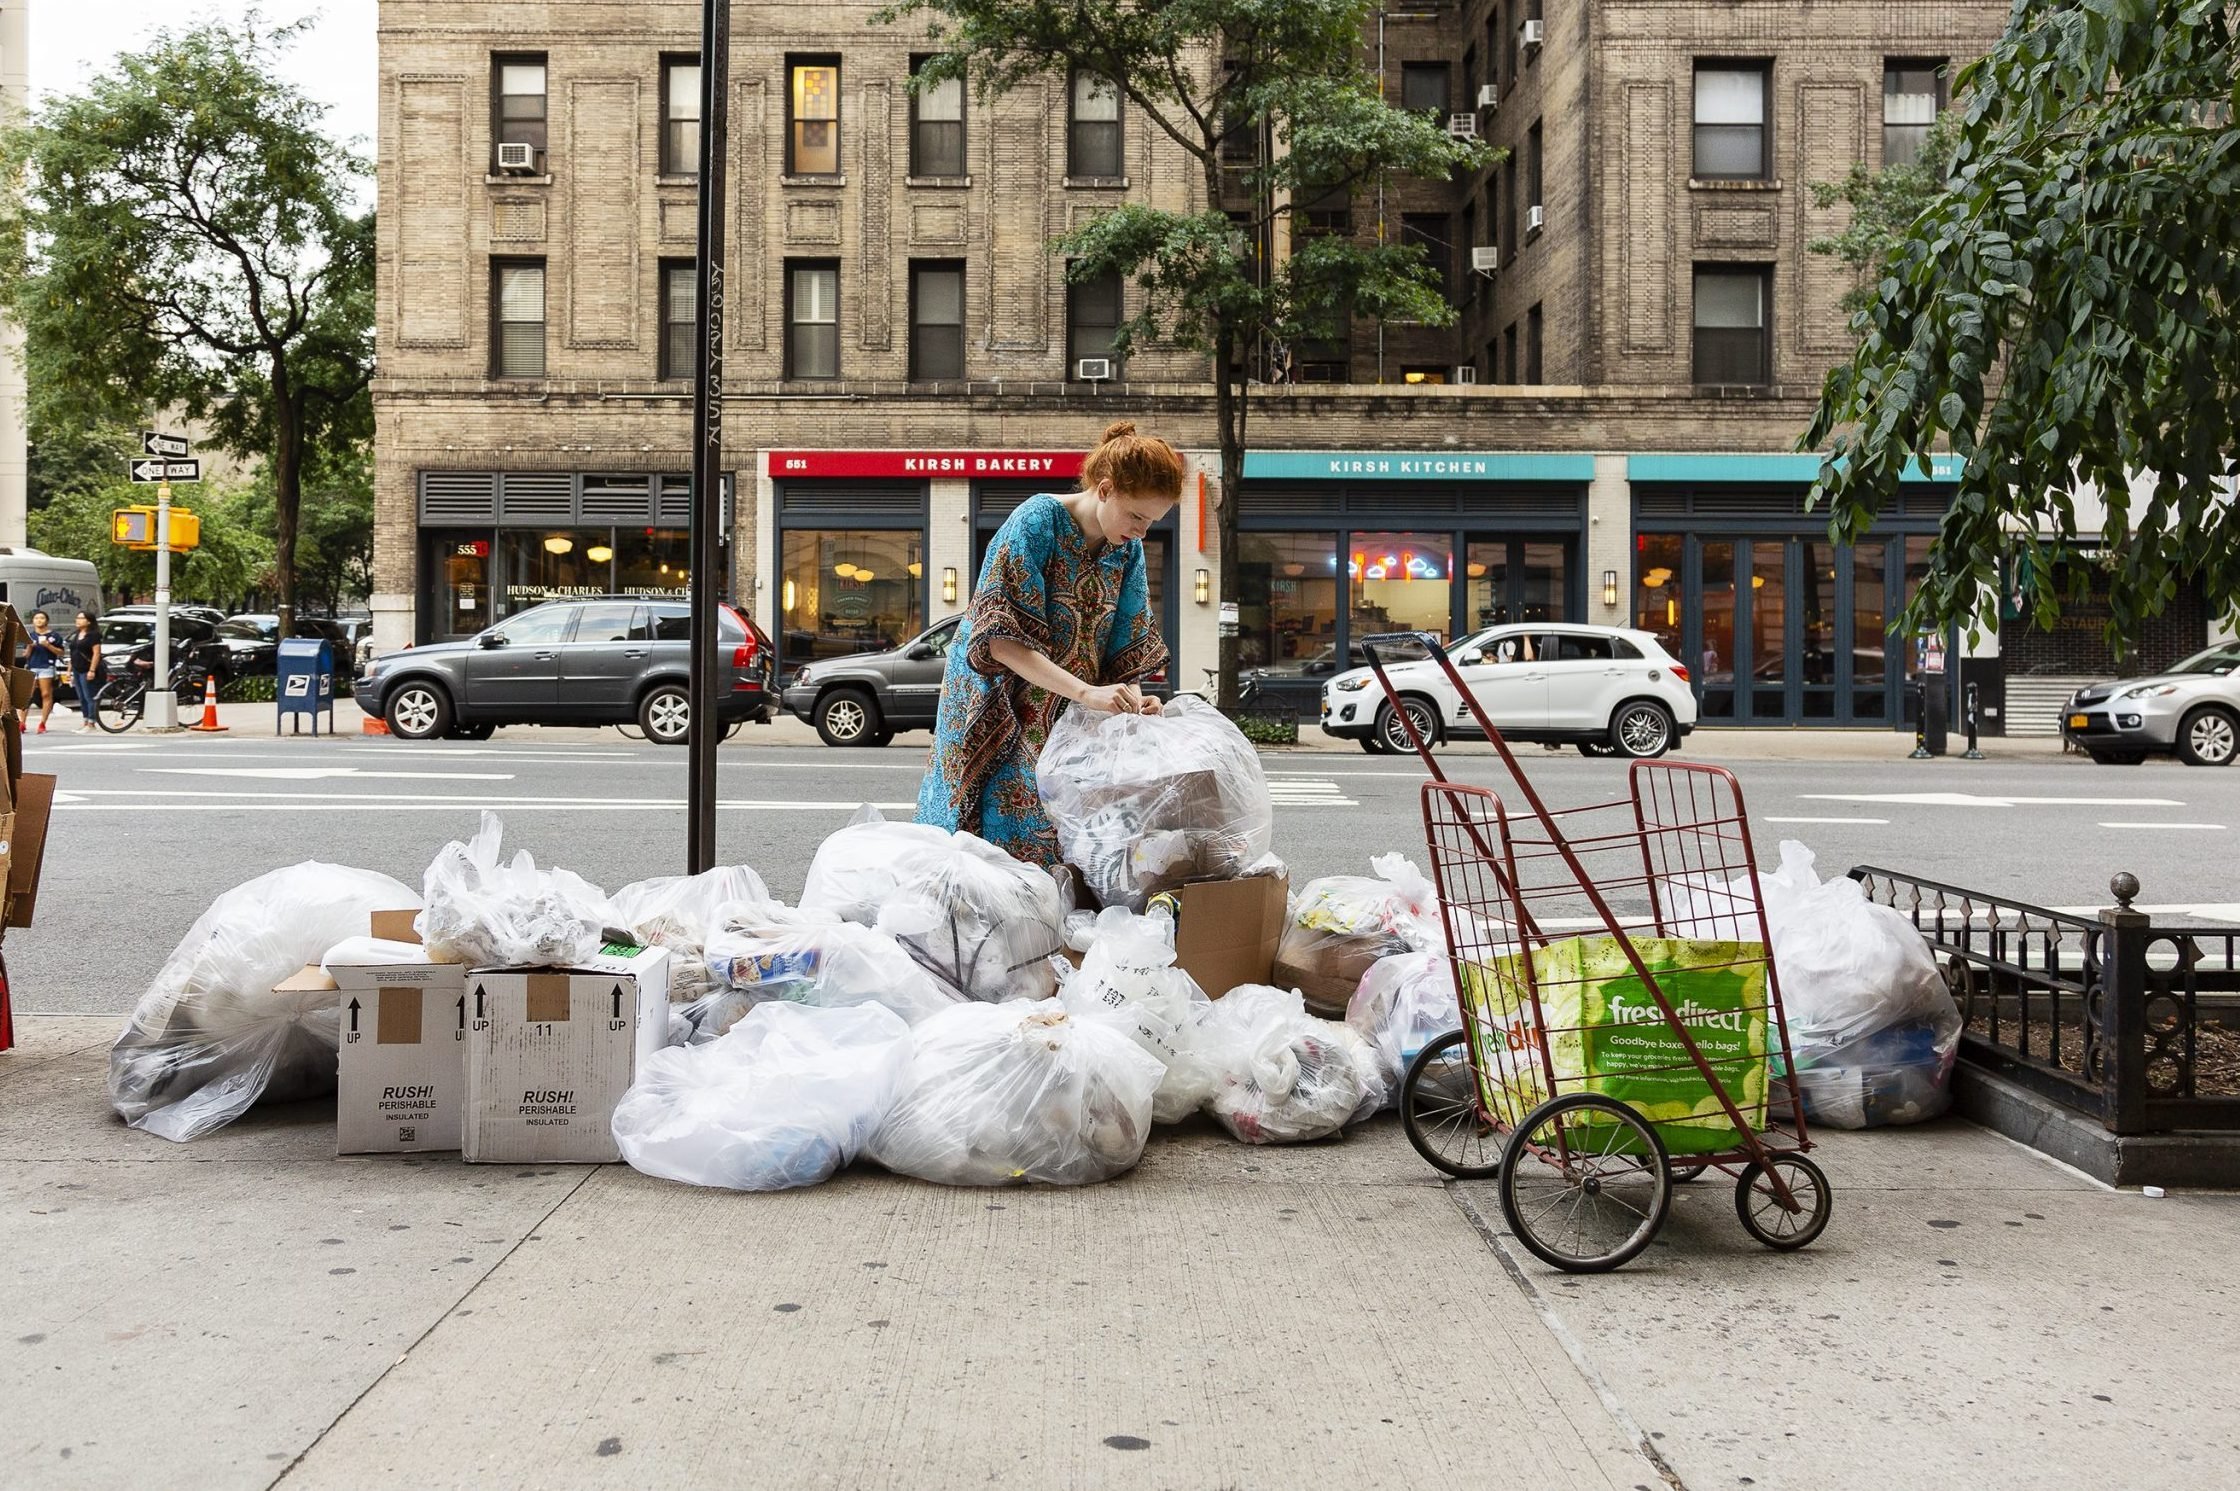 The Best Place to Find Cheap Trash Bags Isn't Where You Think